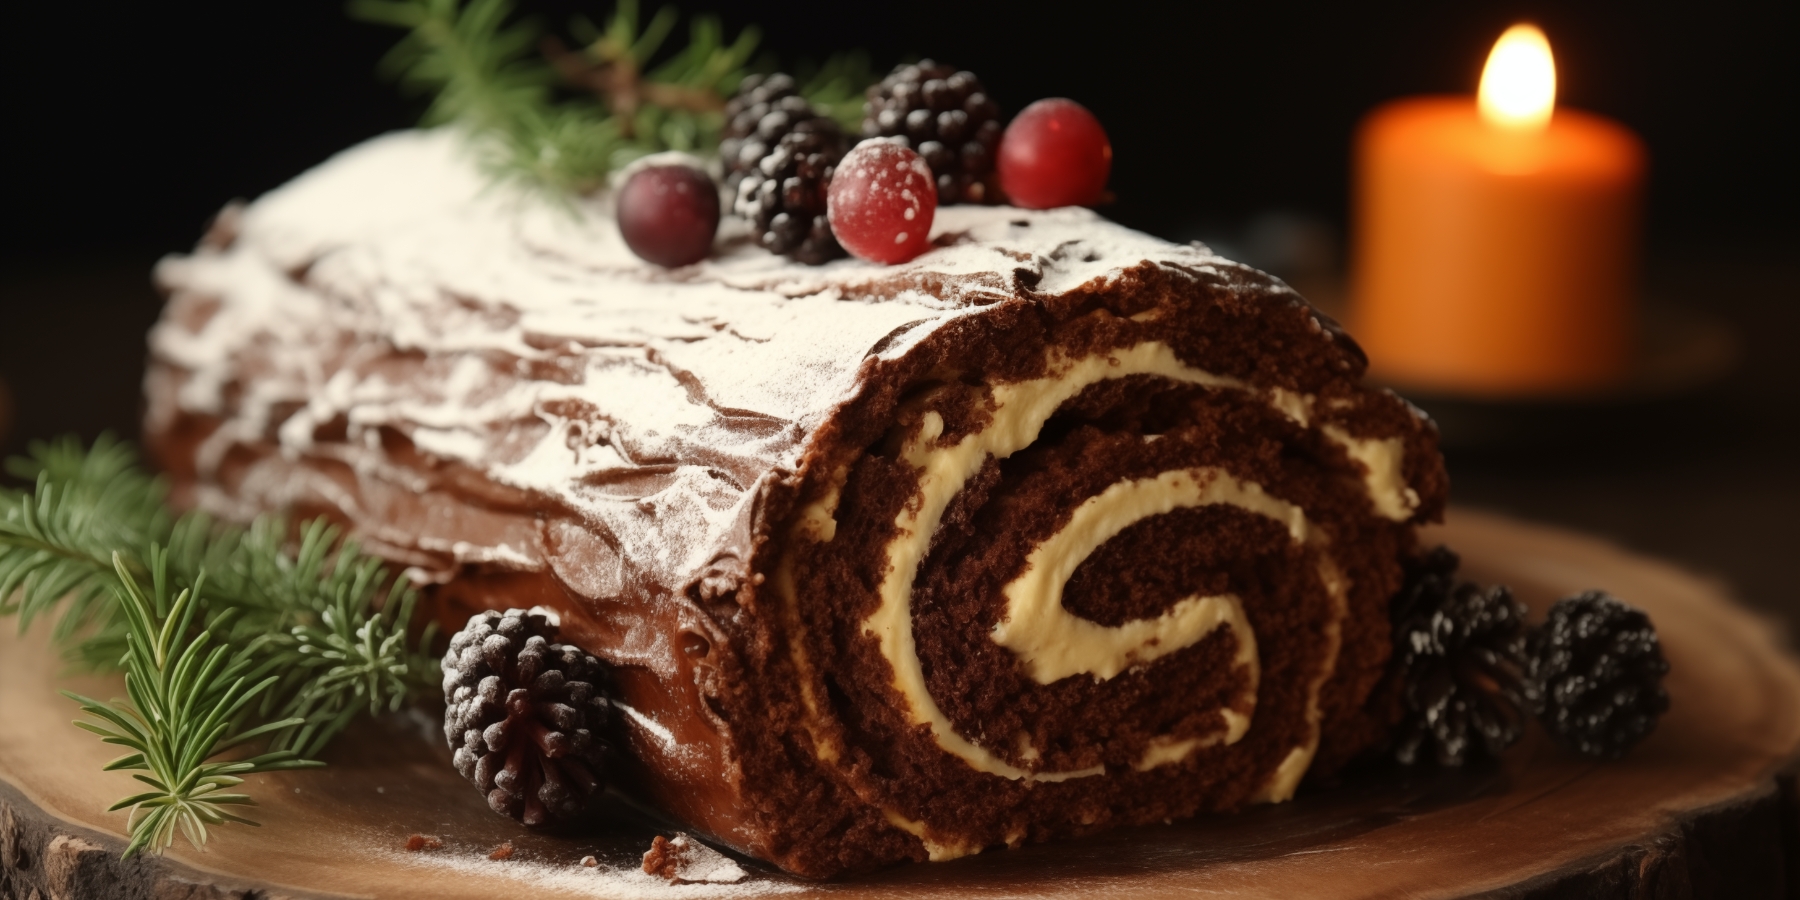 What is your go-to holiday treat?